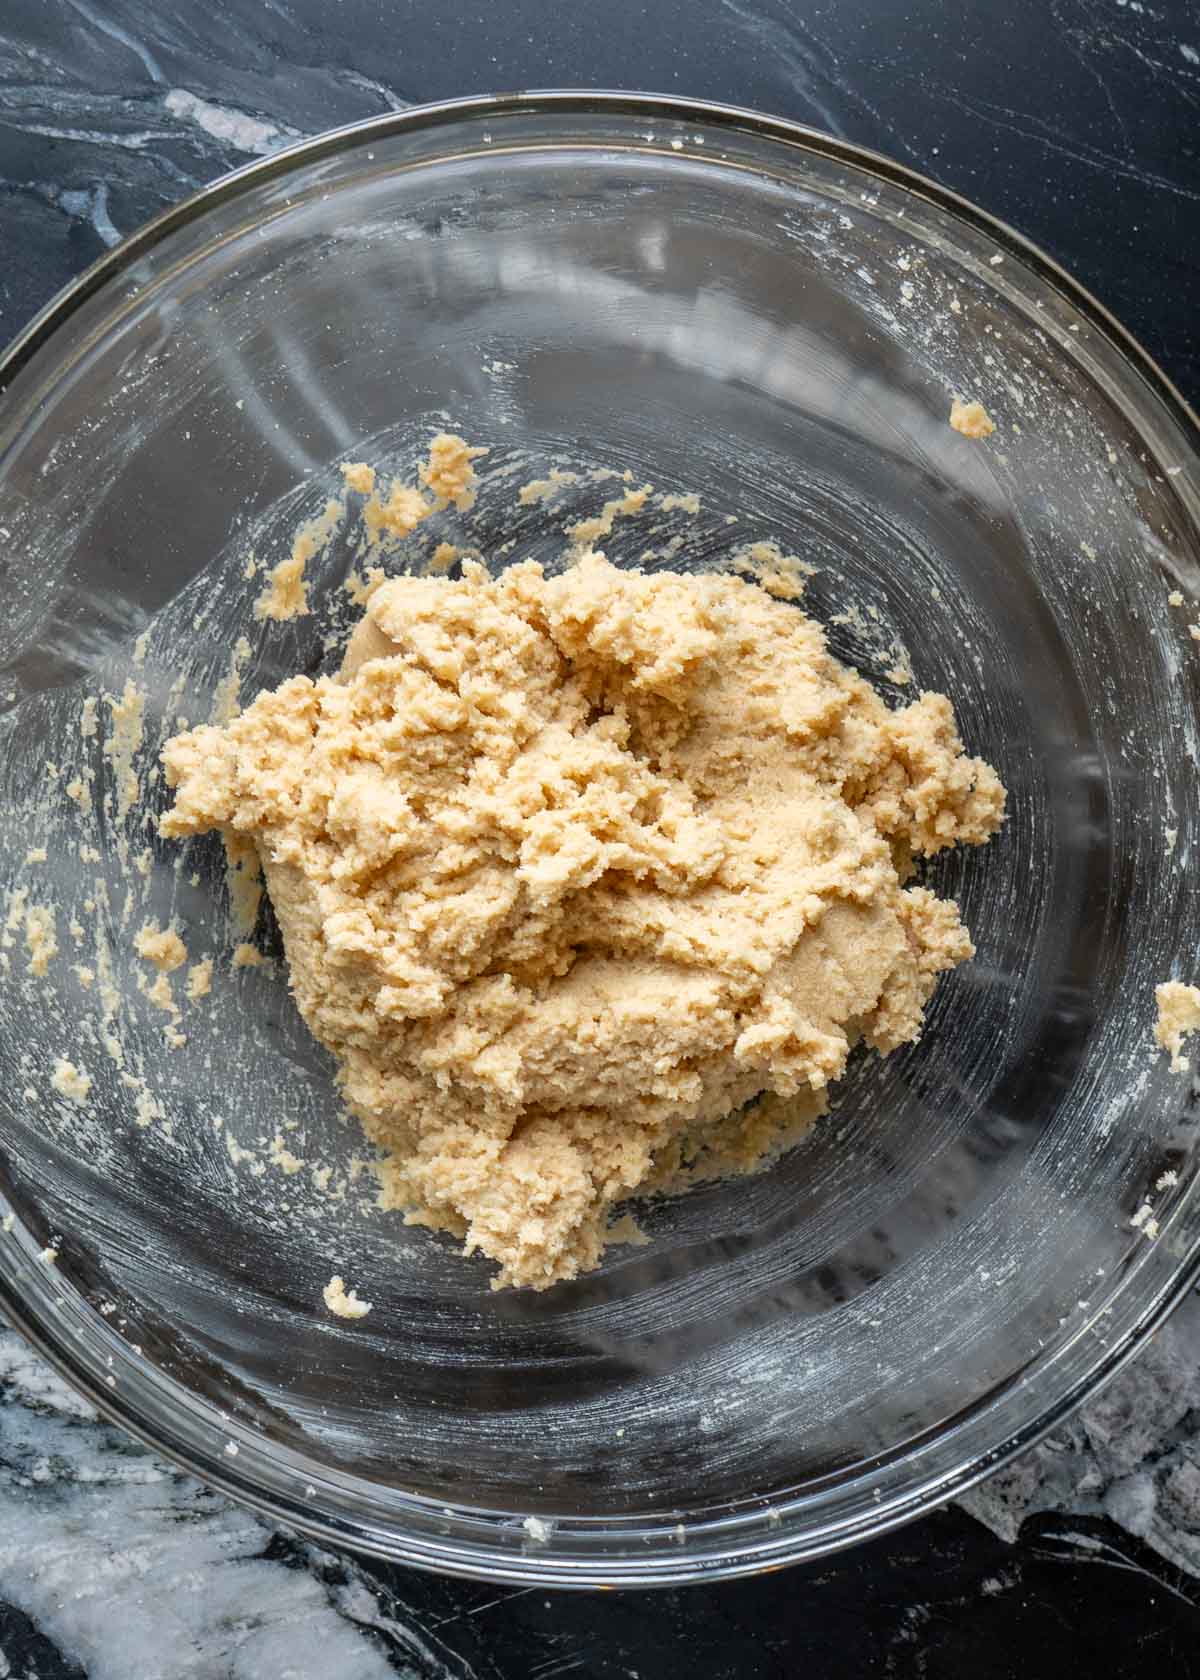 keto cookie dough without any mix-ins